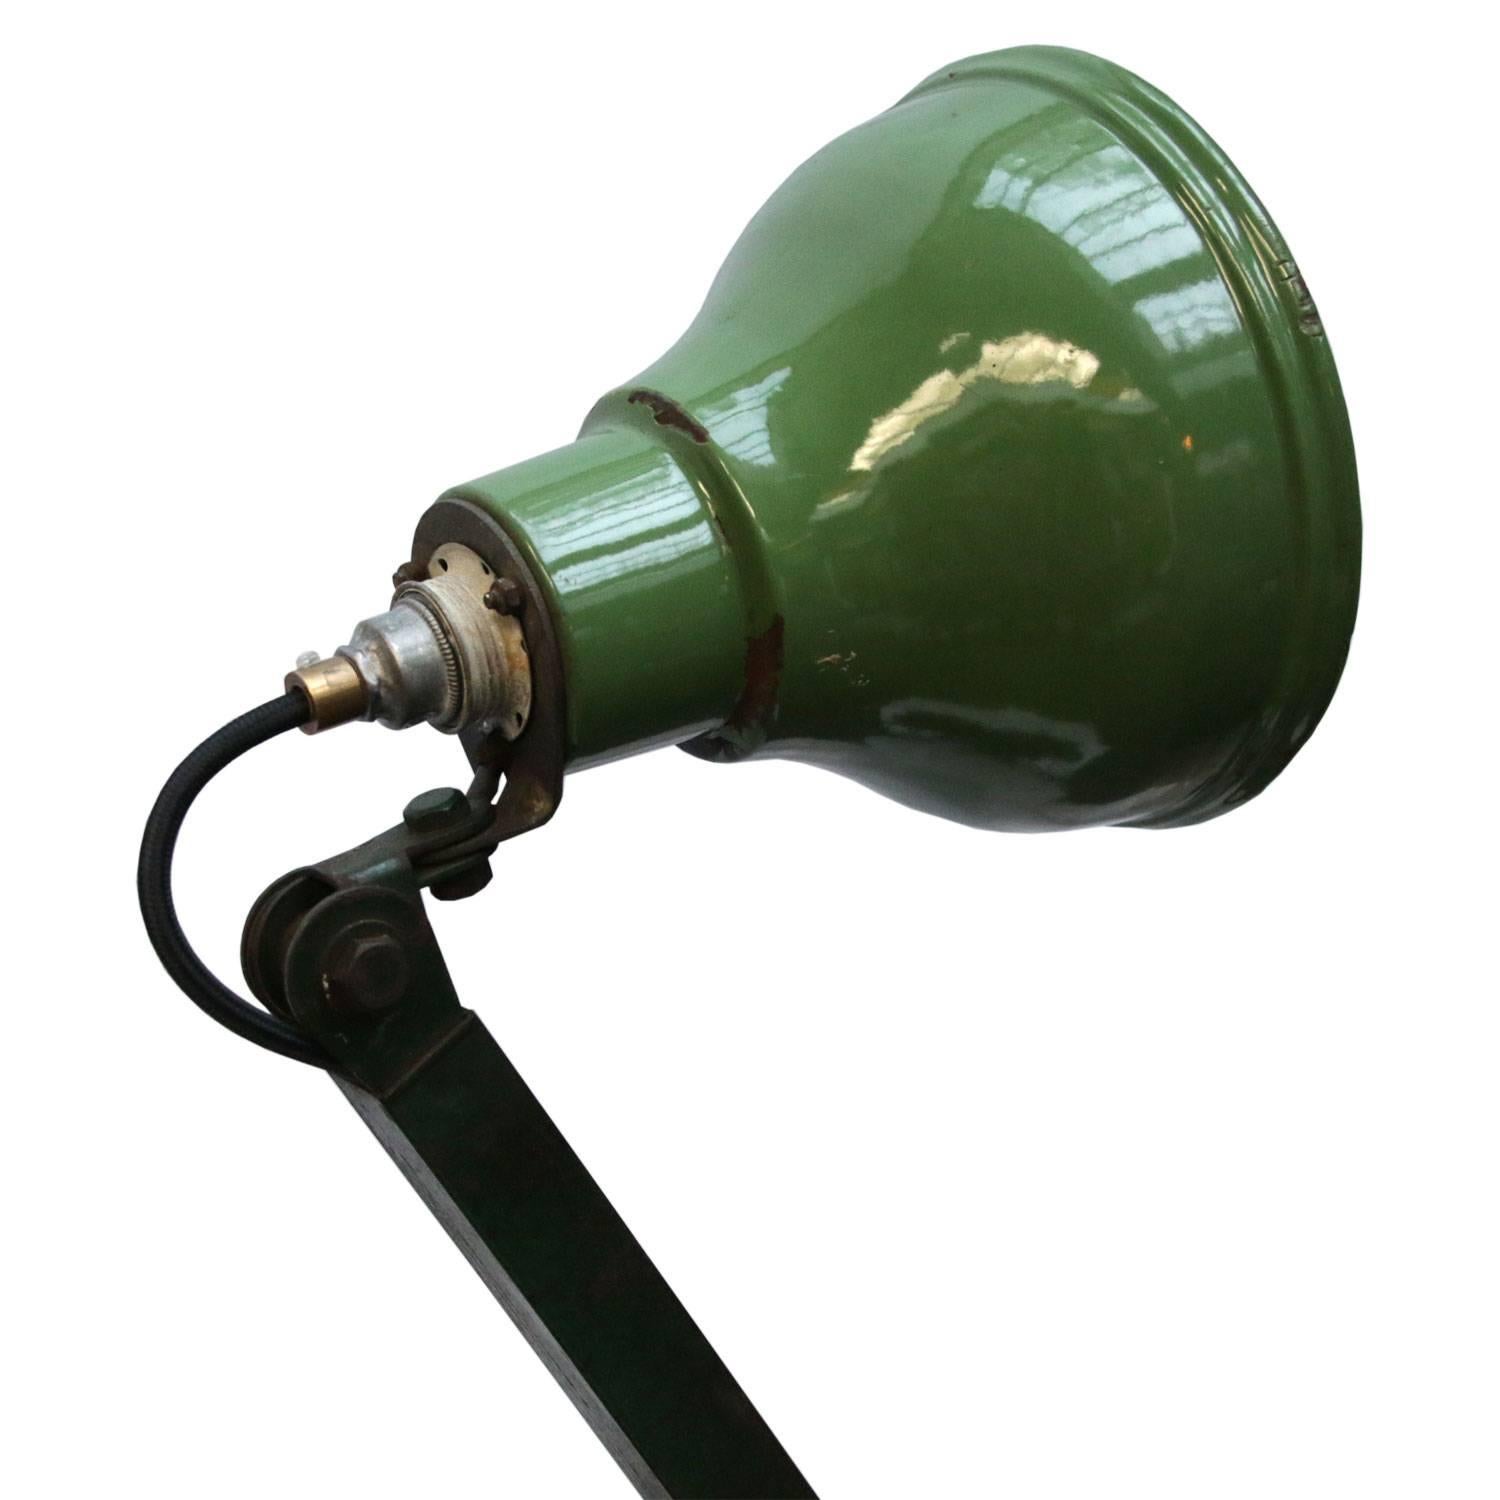 A rare machinist lamp by R.E.A.L. Made in England, circa 1930s. Steel construction with green vitreous enamel shade with white interior. British Vintage Machinist lamp, machinist table / desk / work light. By R.E.A.L. UK. Green Enamel shade. Rewired